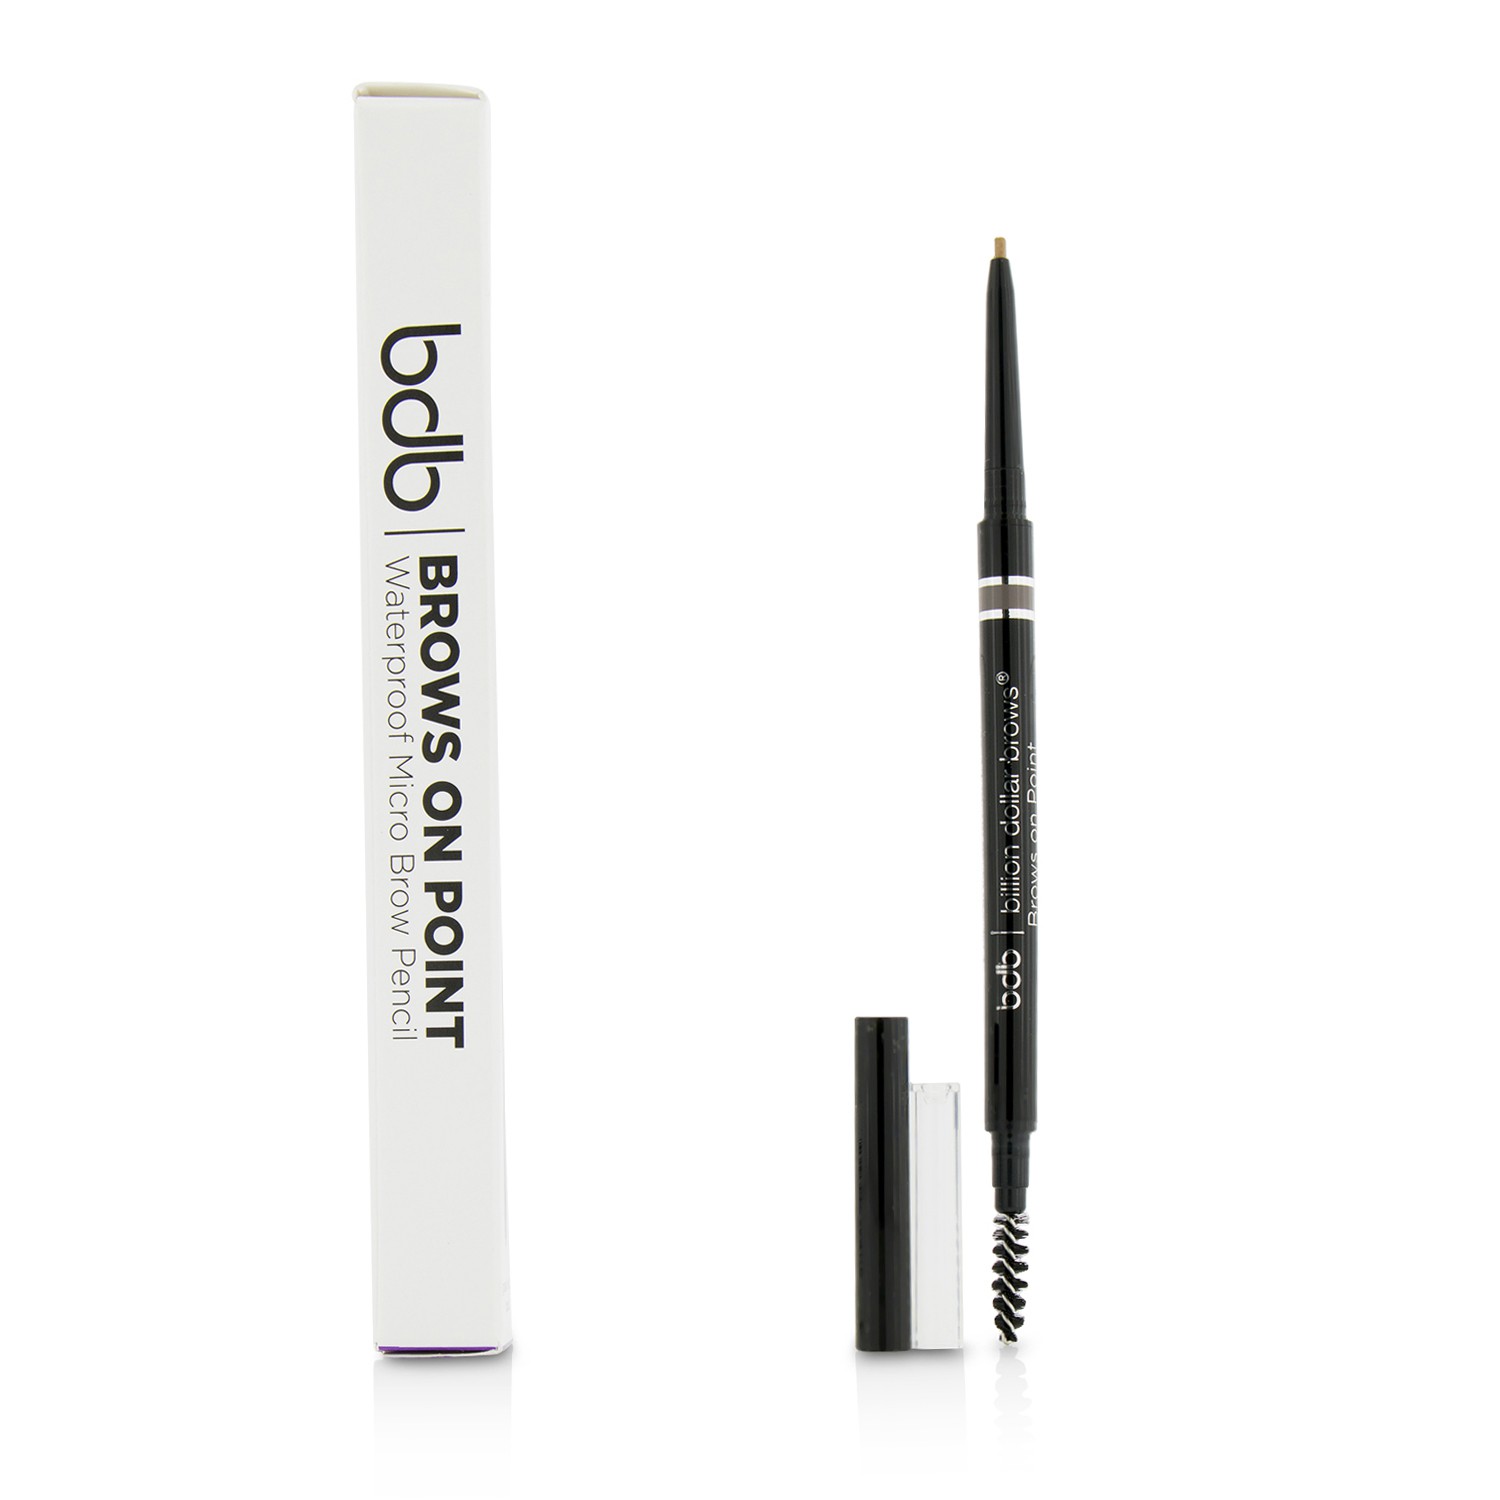 Brows On Point Waterproof Micro Brow Pencil - Blonde Billion Dollar Brows Image